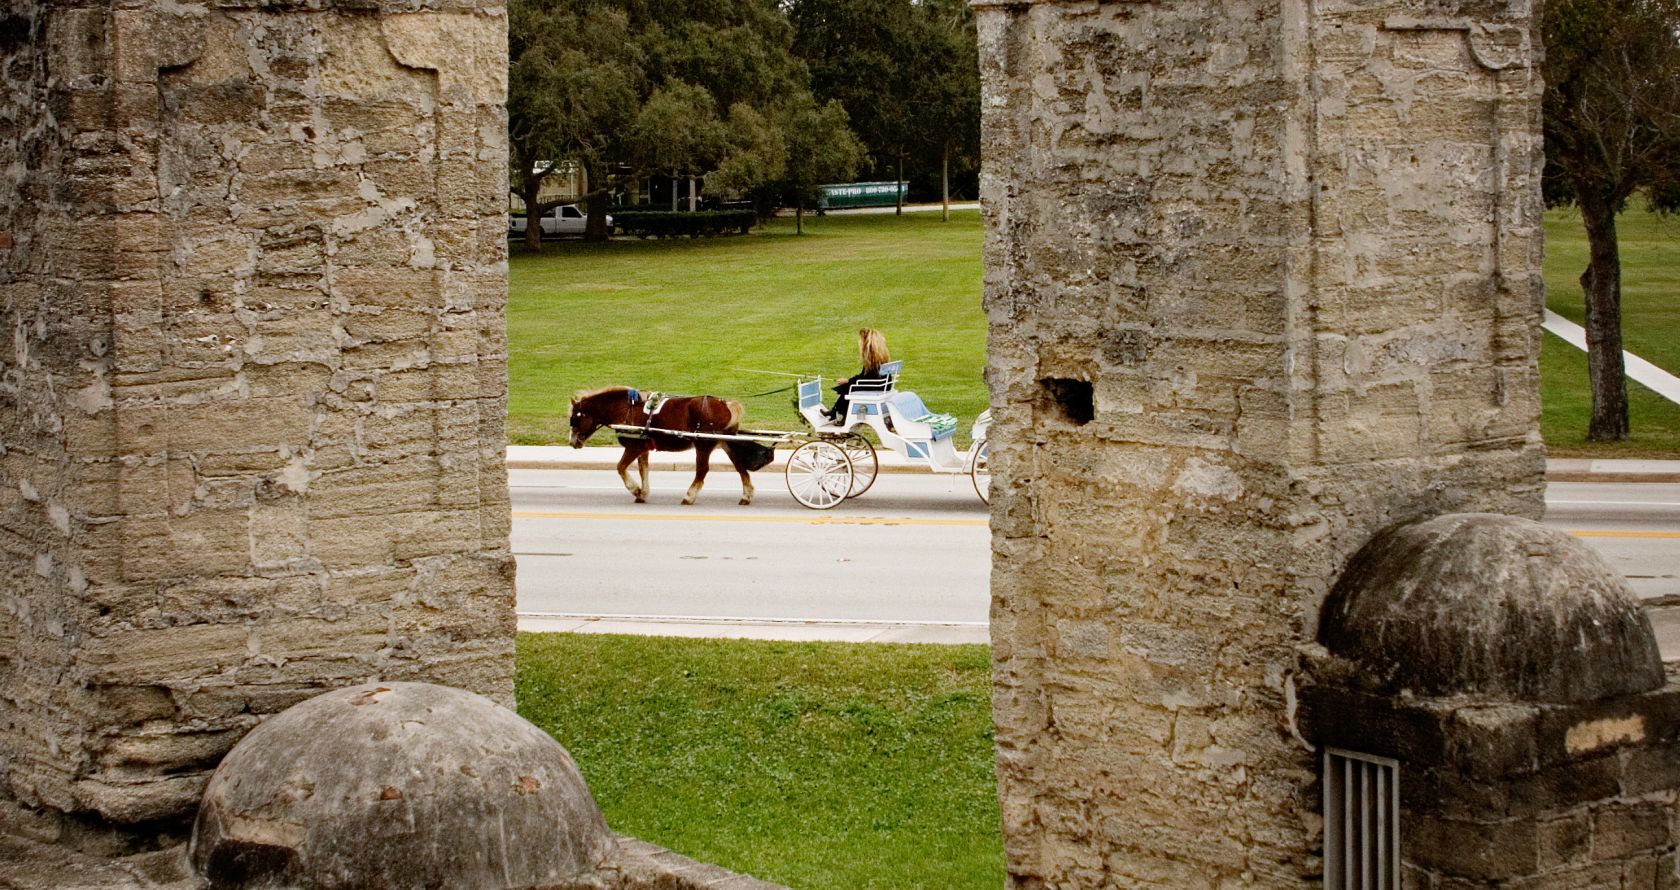 View of Horse and Buggy and the Old City Gates